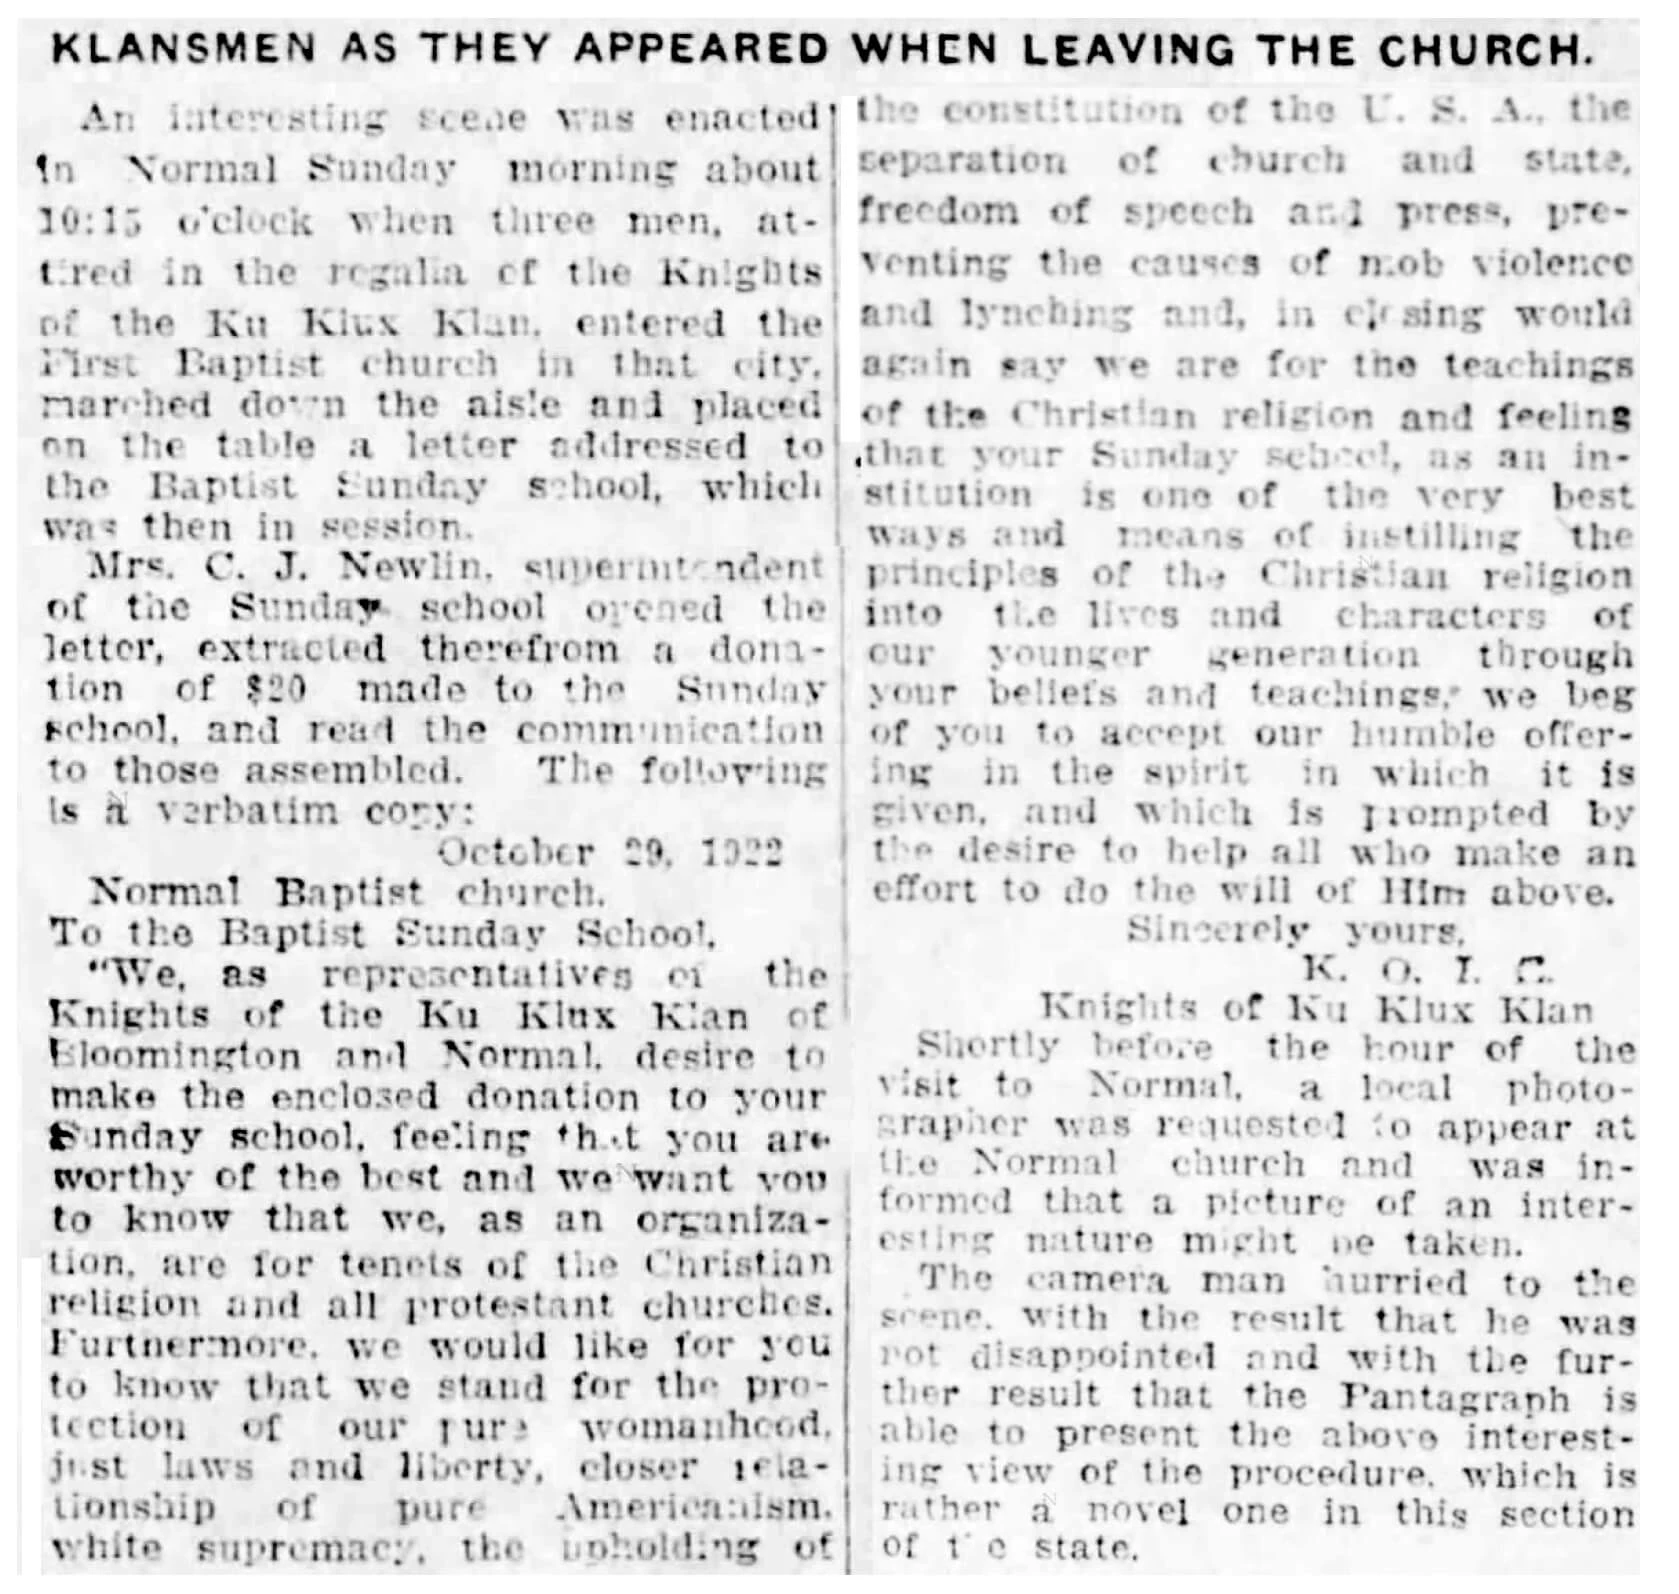 Article from newspaper titled klansmen as they appeared when leaving the church giving details of a letter left in church by with $20 donation to sunday school class